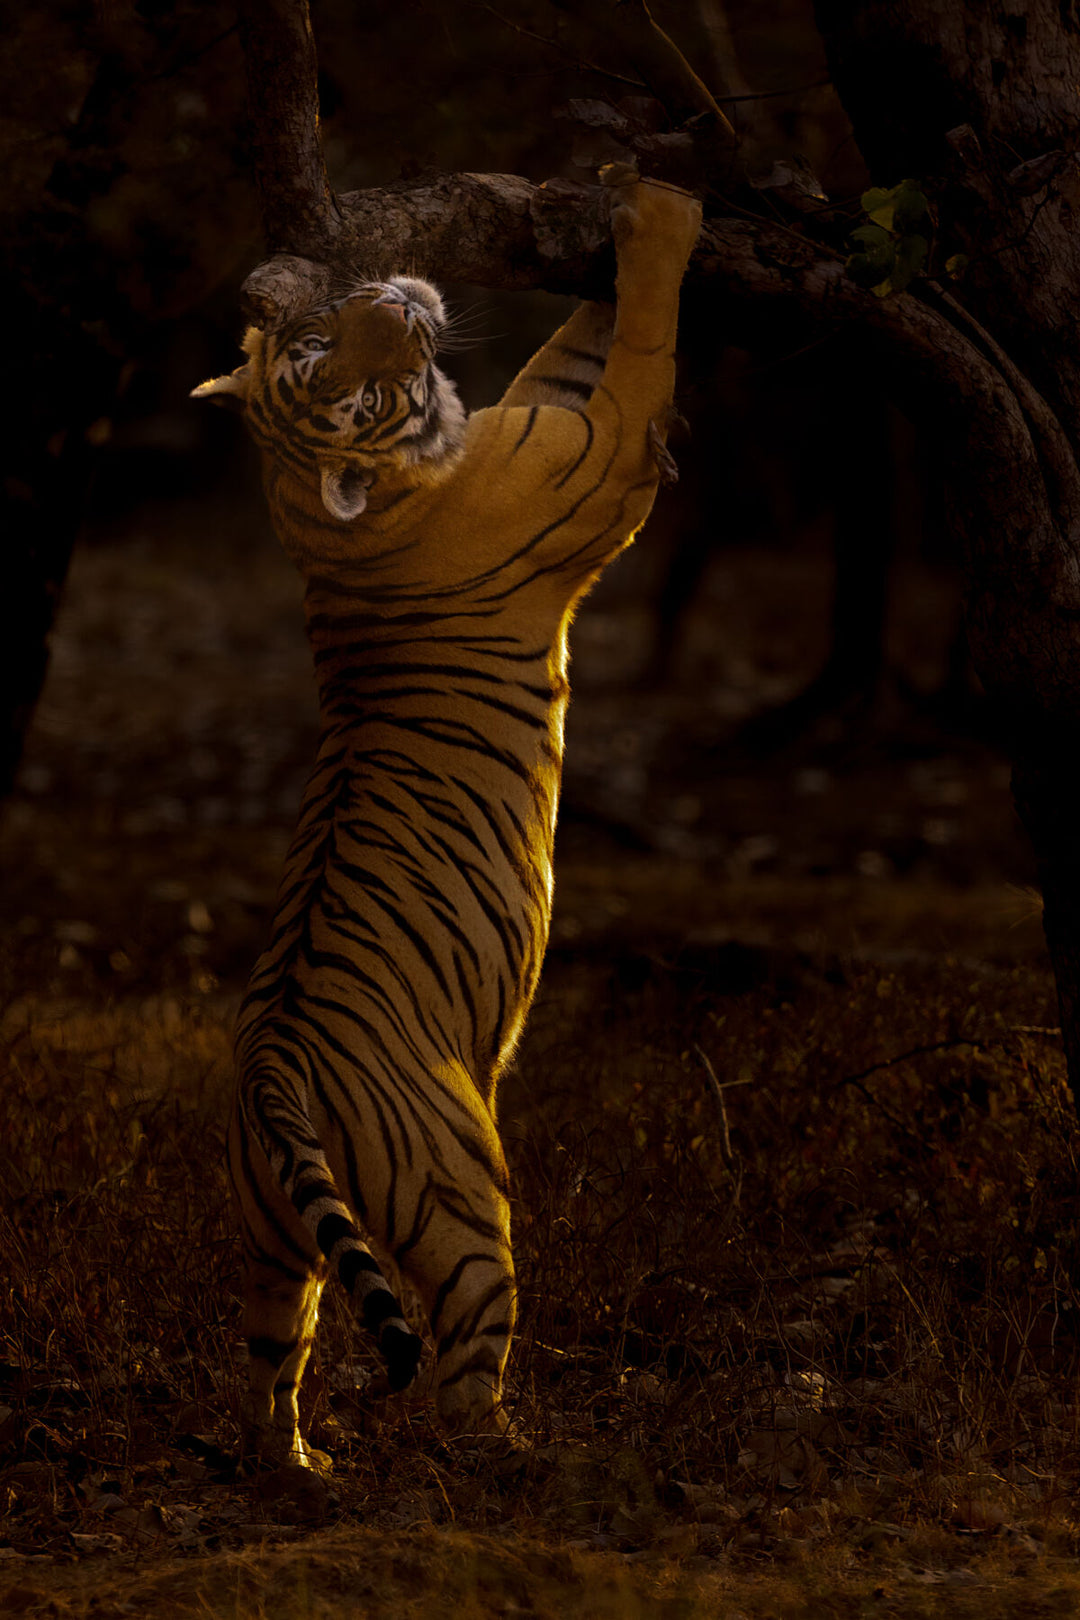 Fine art framed photograph: A majestic tiger, bathed in dappled forest light, stands tall on hind legs, rubbing against a gnarled branch. A powerful display of wild beauty and territorial determination. By Thomas Nicholson